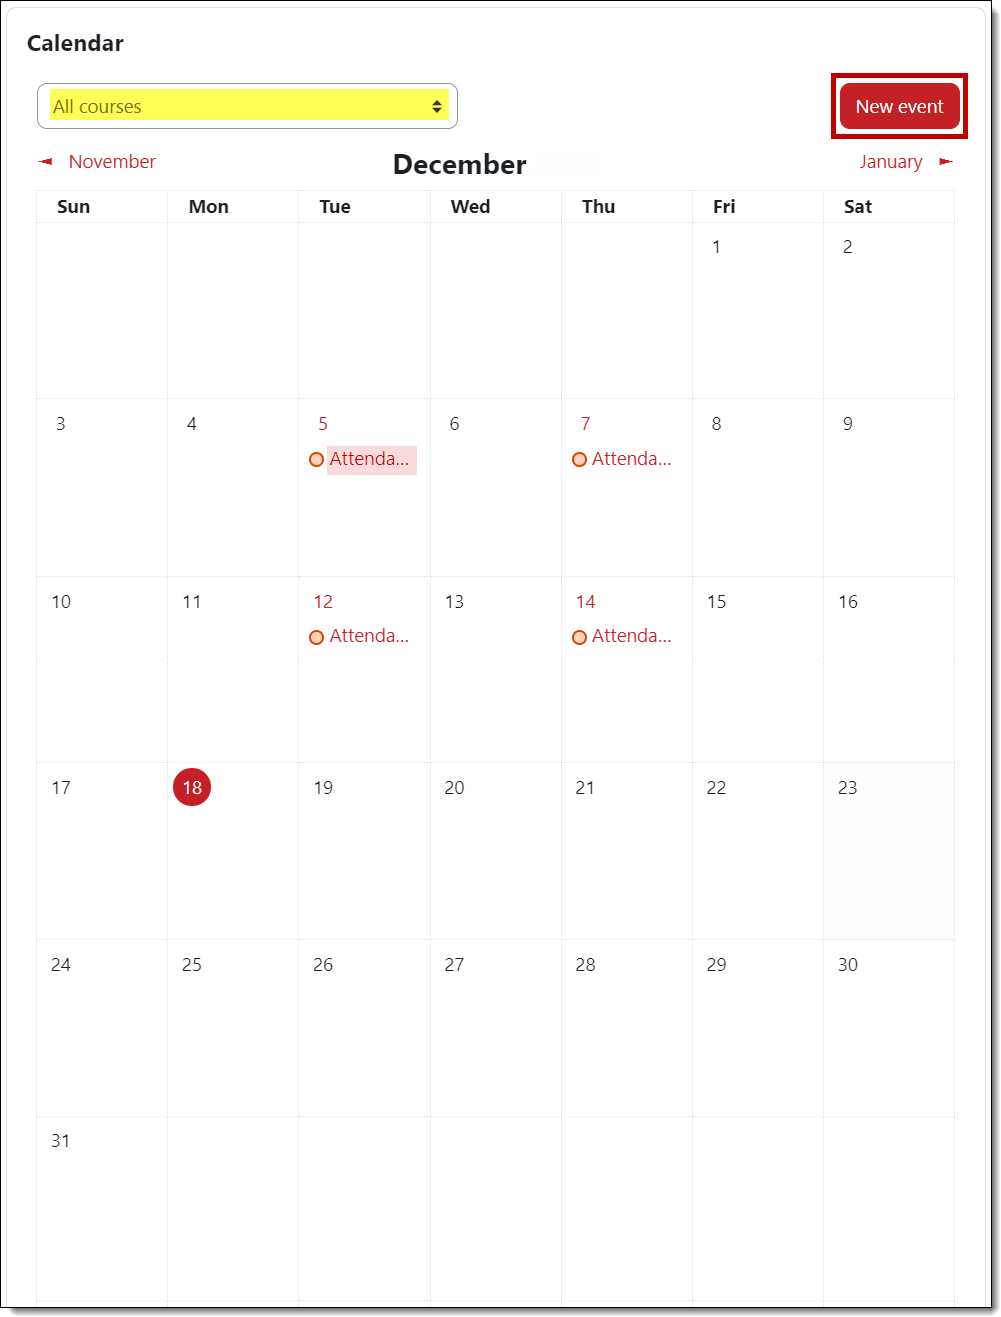 Screenshot of calendar with course selector and New event button highlighted